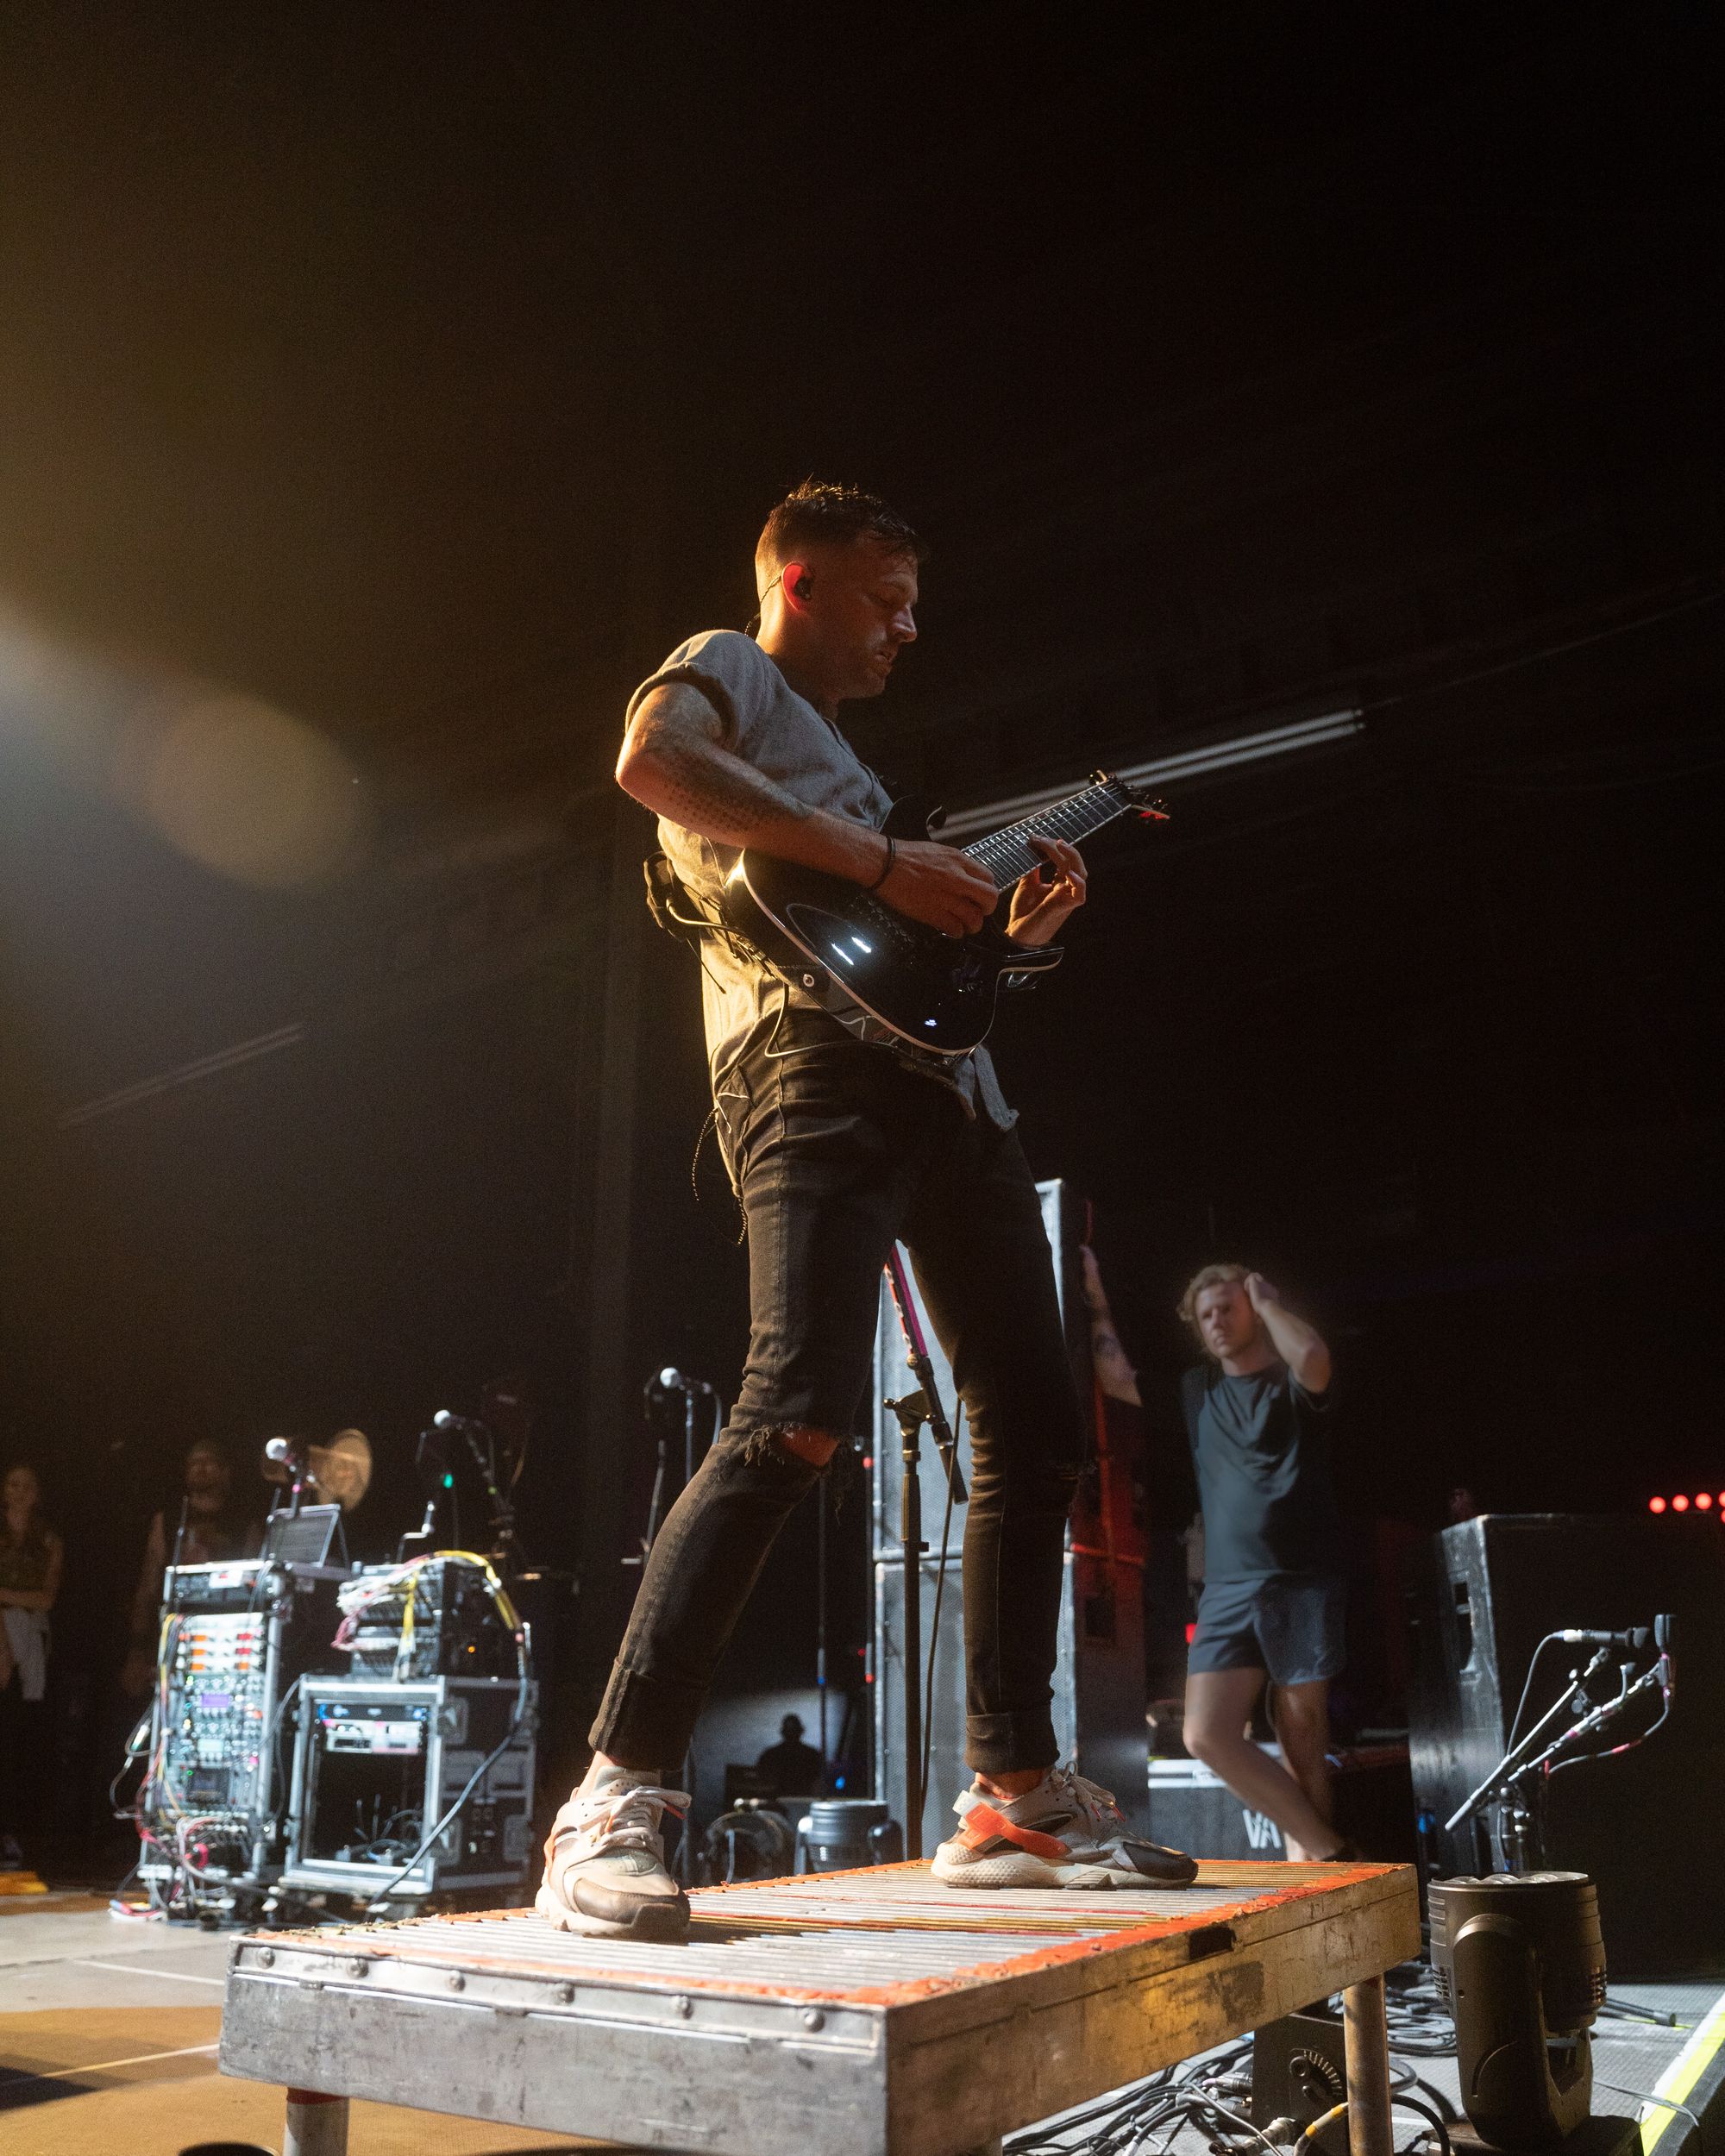 Concert Review - The I Prevail 'True Power Tour' lights up Dallas